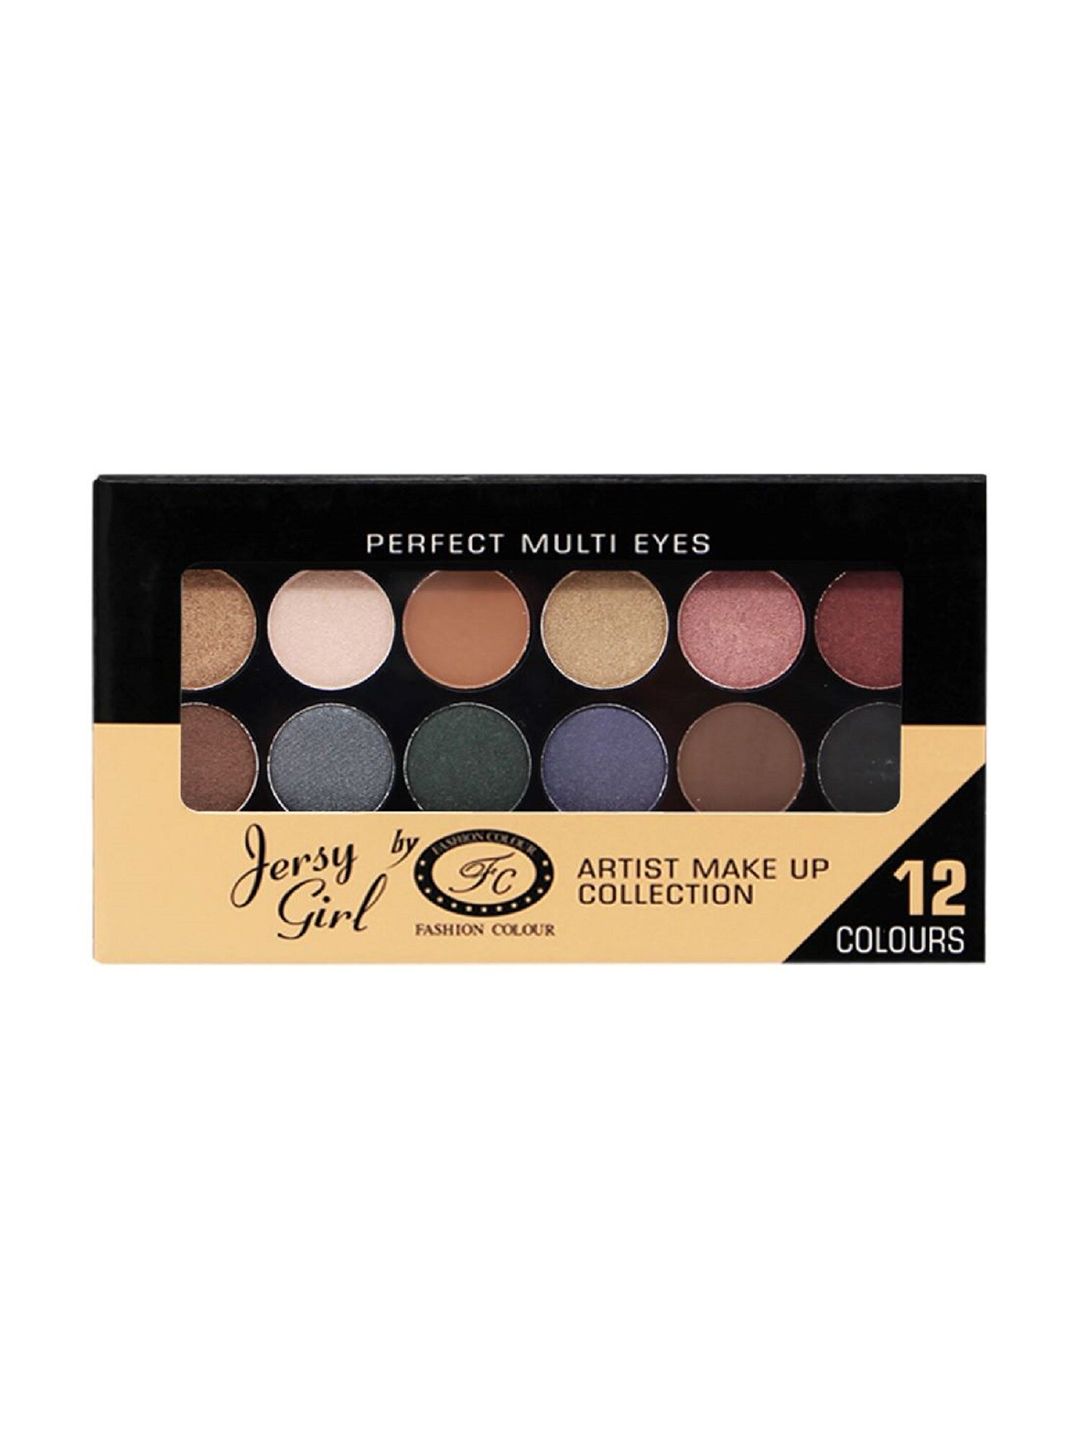 Fashion Colour Jersy Girl Artist Makeup Collection 12 Colours Eyeshadow Palette - Shade 01 Price in India